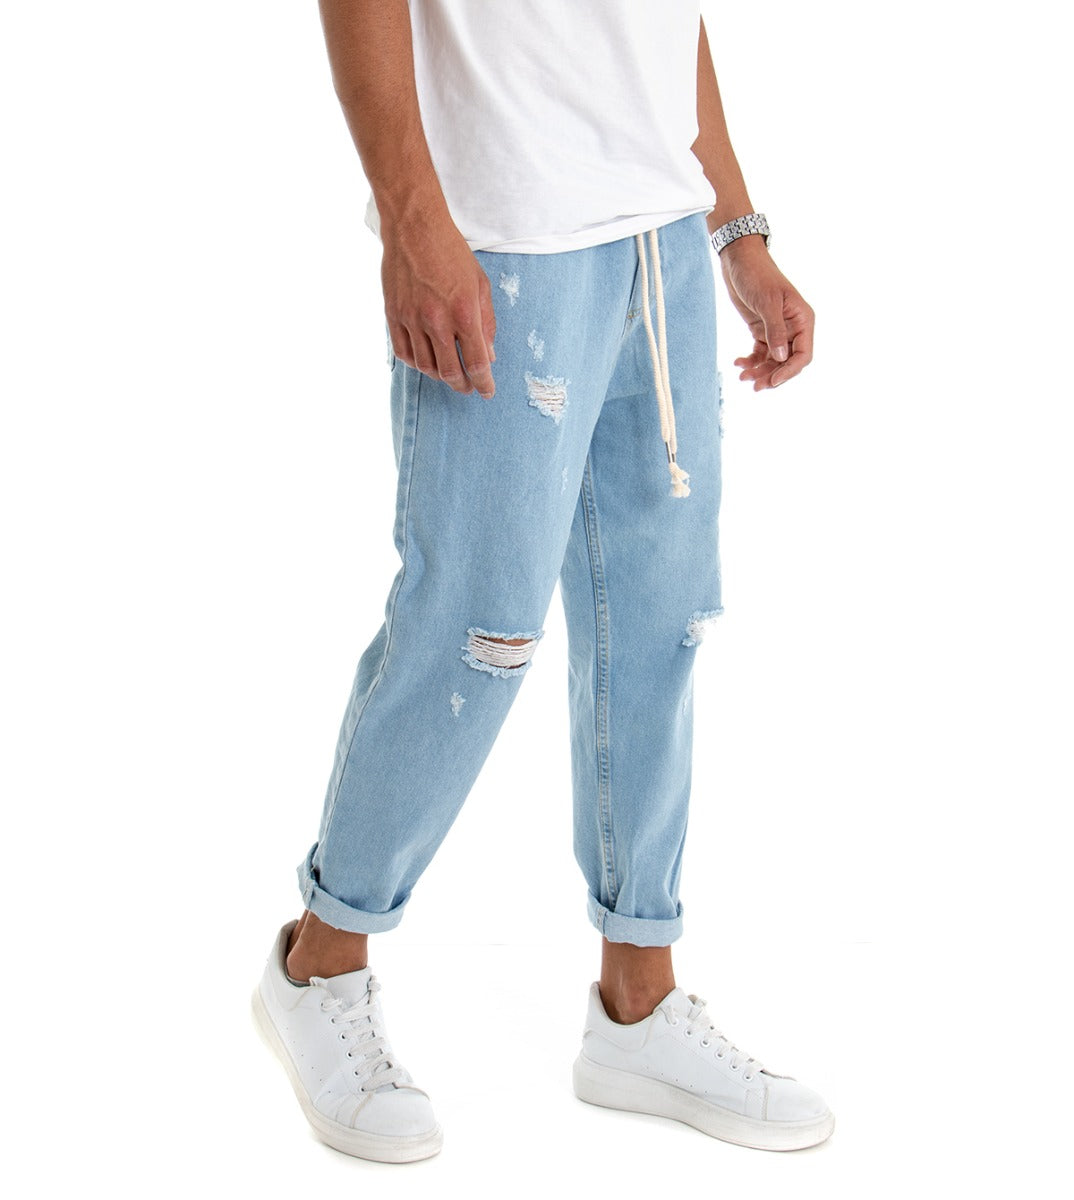 Men's Light Denim Jeans Trousers Loose Fit Drawstring Trousers GIOSAL-P3021A